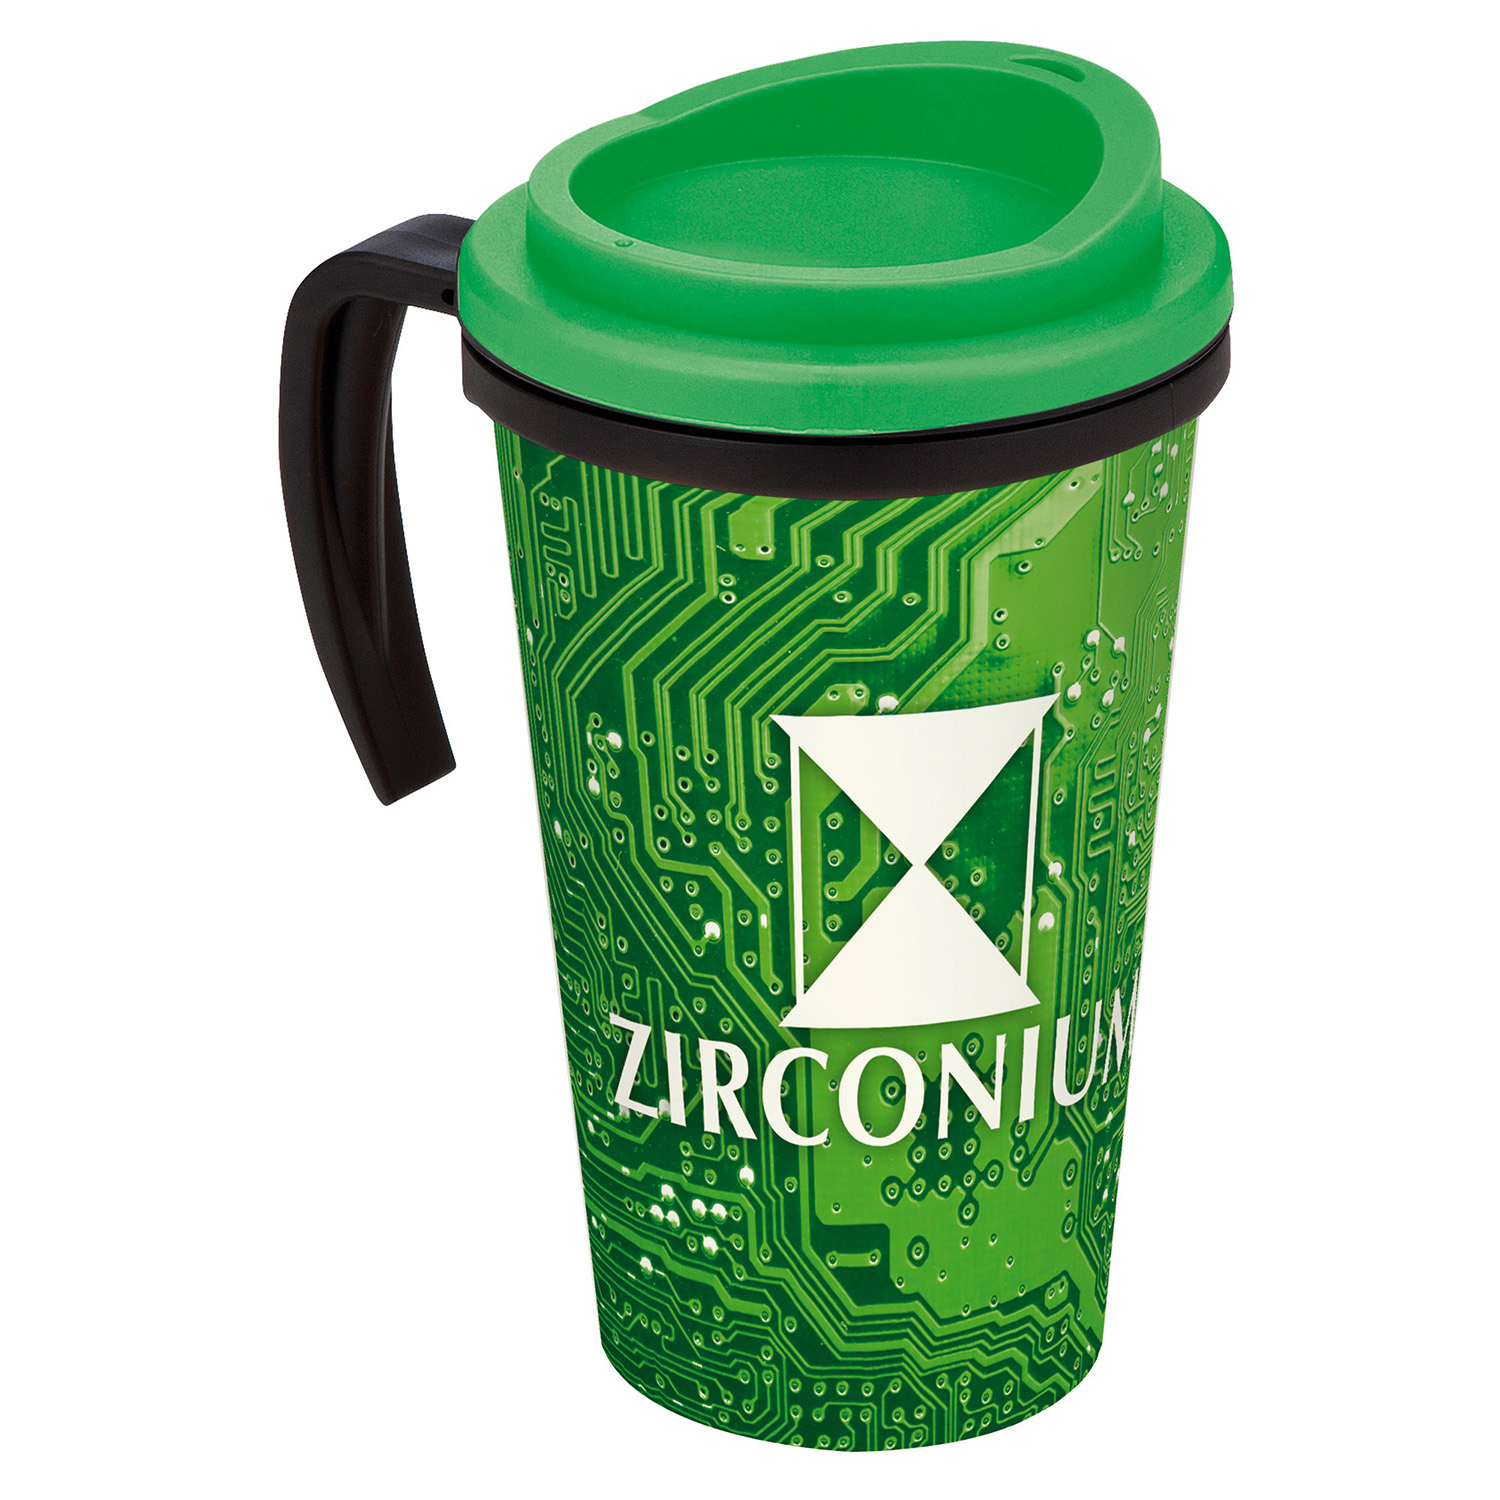 Grande Thermal Mug showing full colour print with green lid